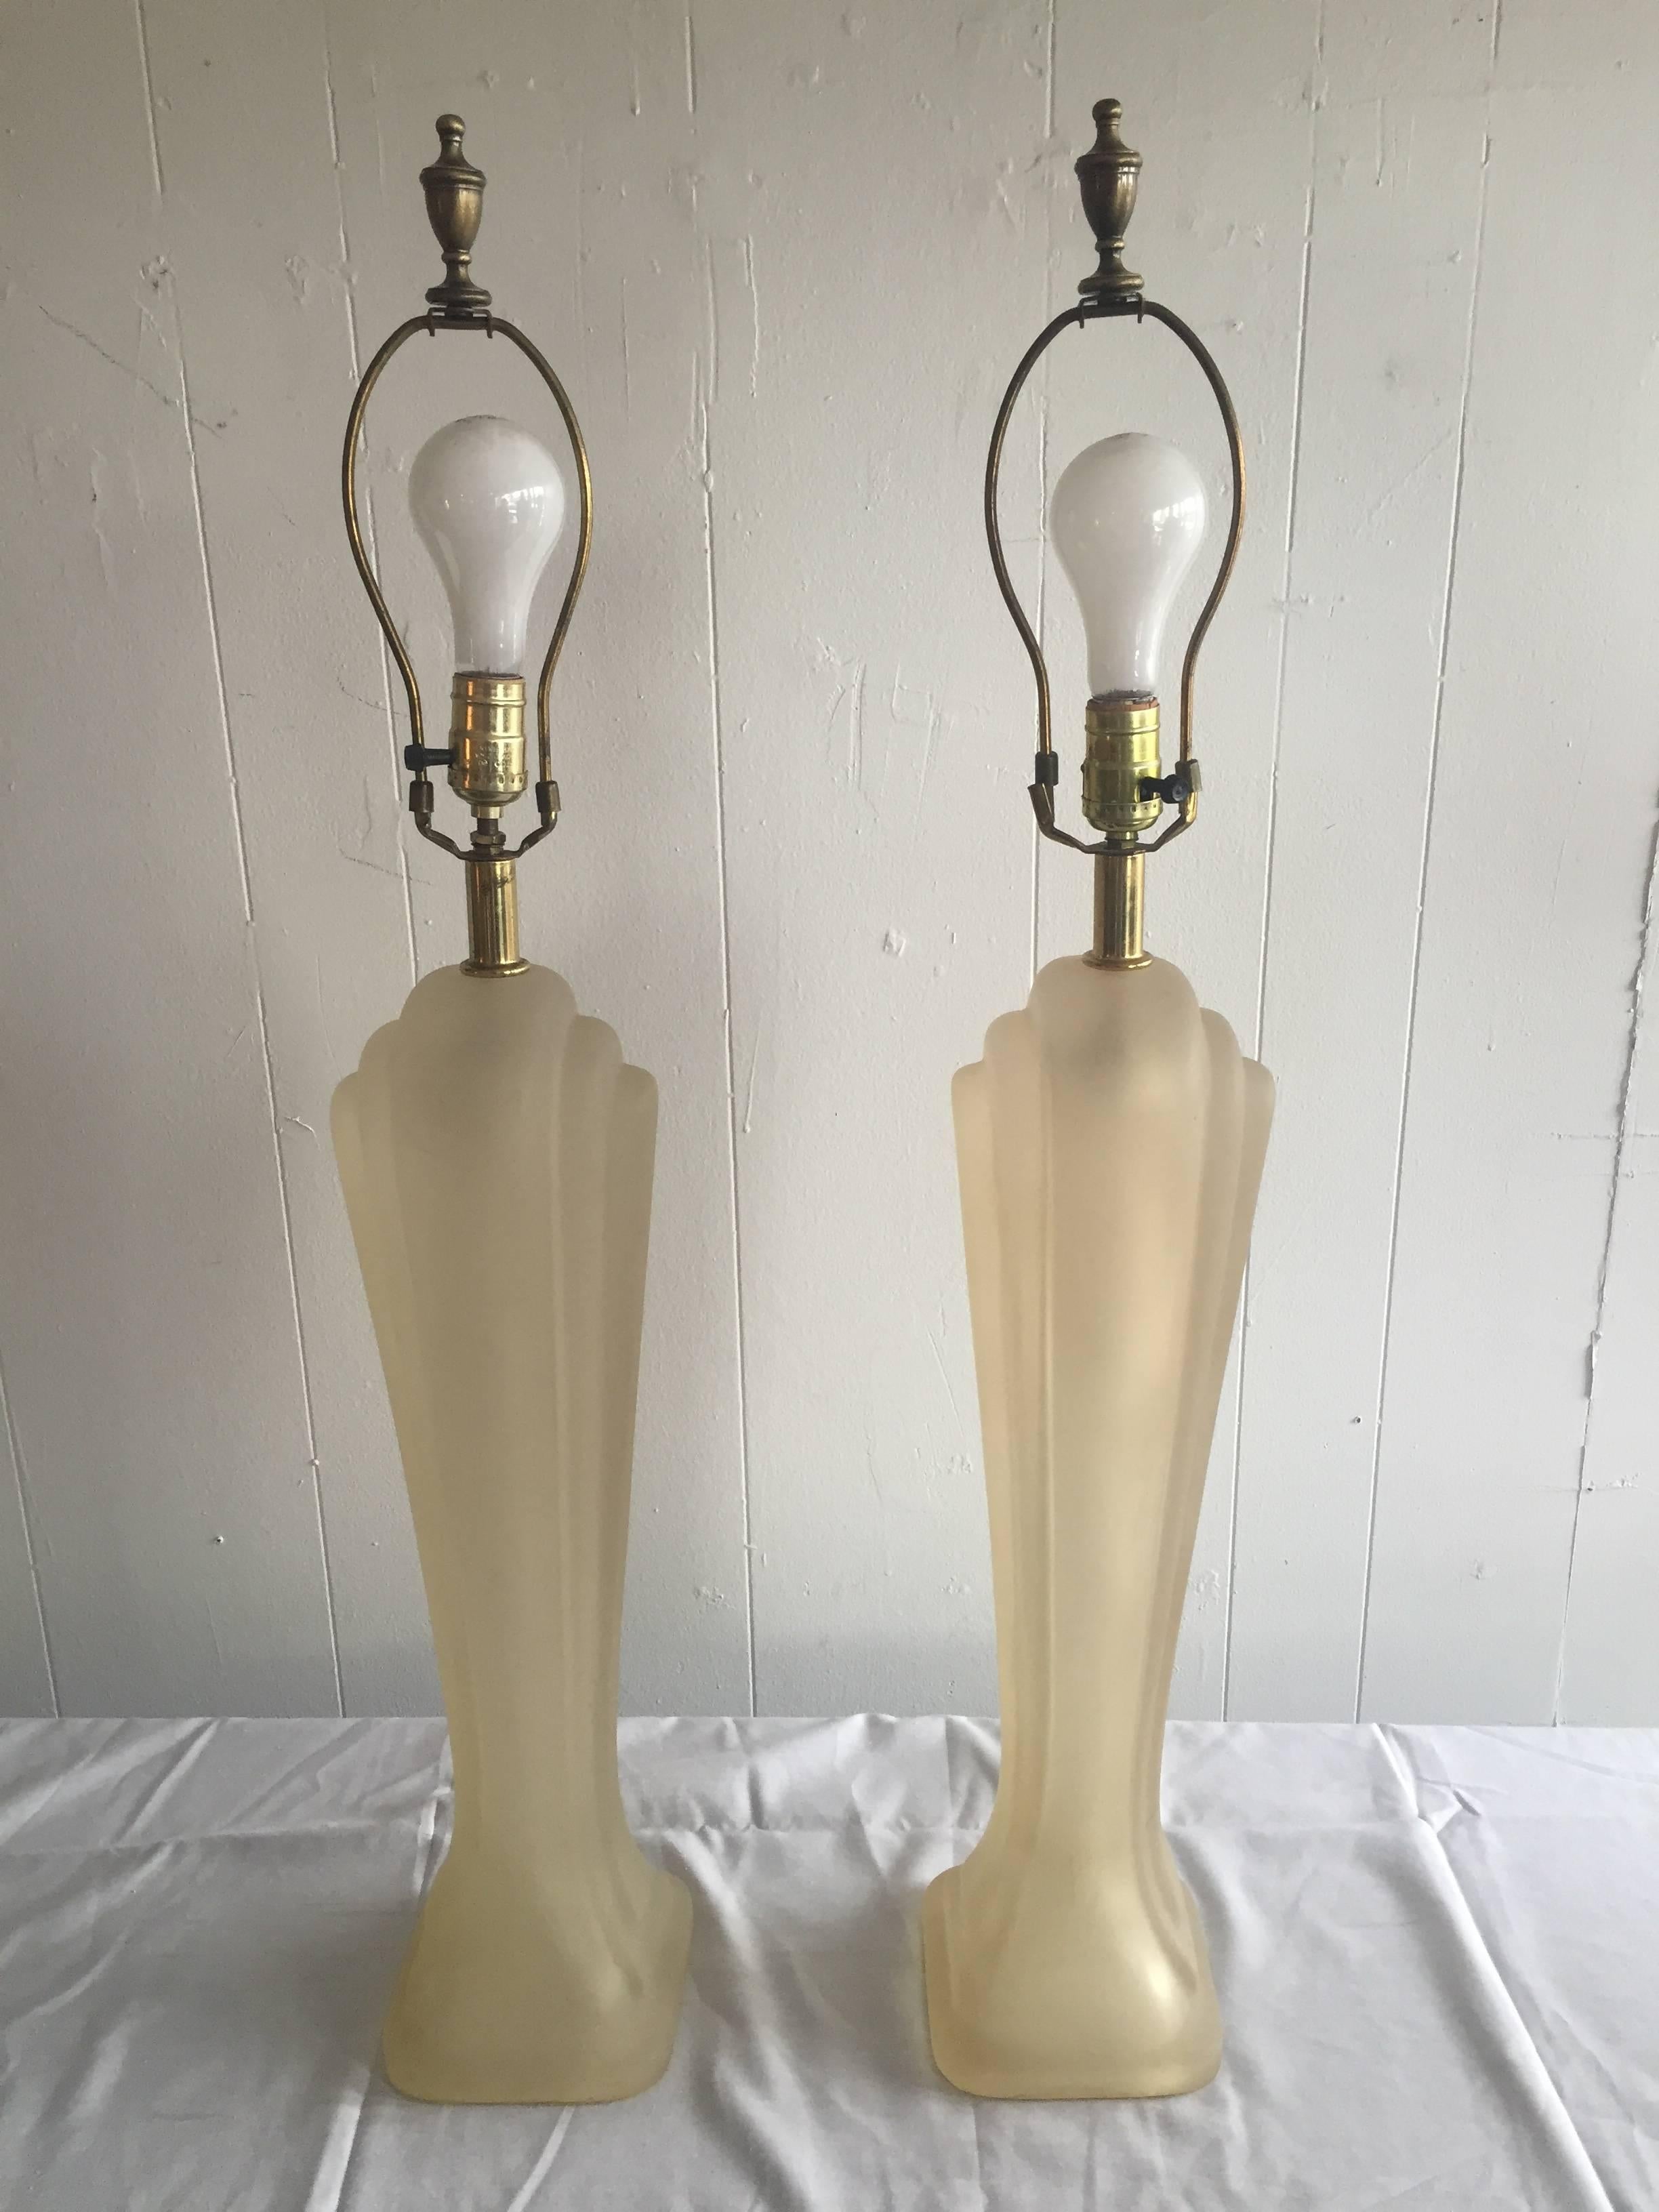 Elegant pair of signed frosted acrylic table lamps by Paulo Gucci for Gucci Lamps. Signed Paolo Gucci. Actual body of lamps measures 23